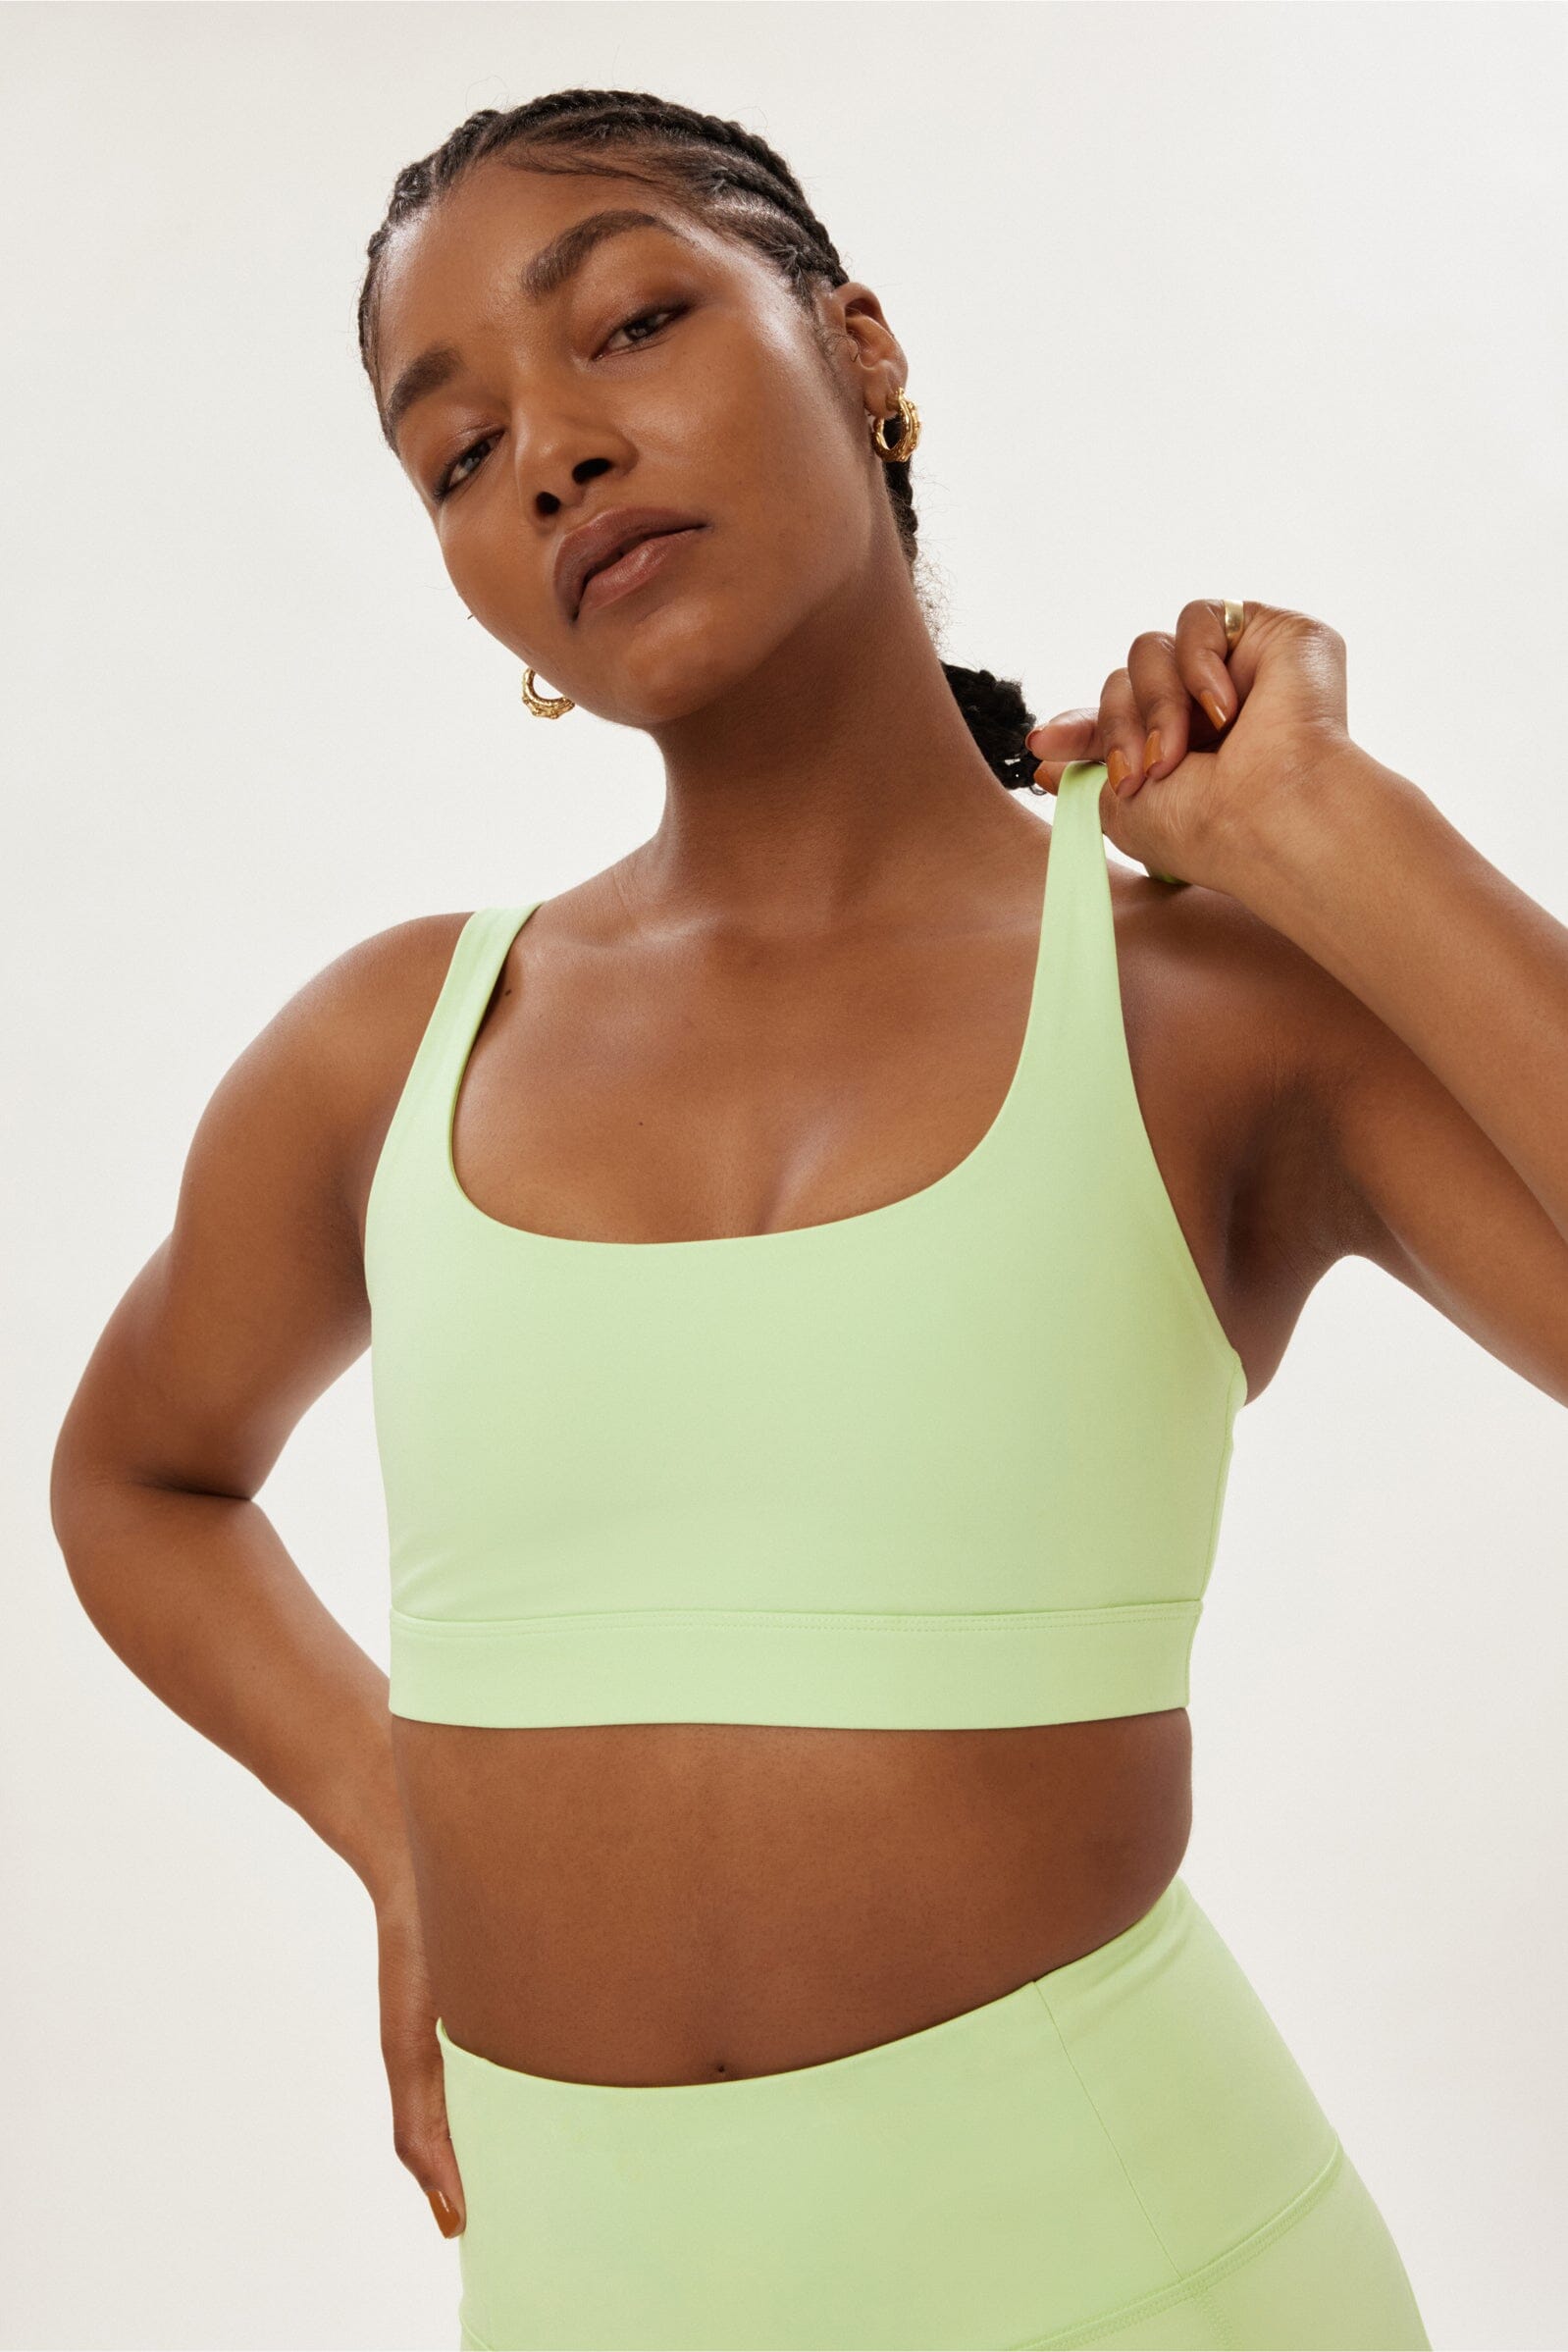 Green Dylan Sport Bra by Girlfriend Collective on Sale